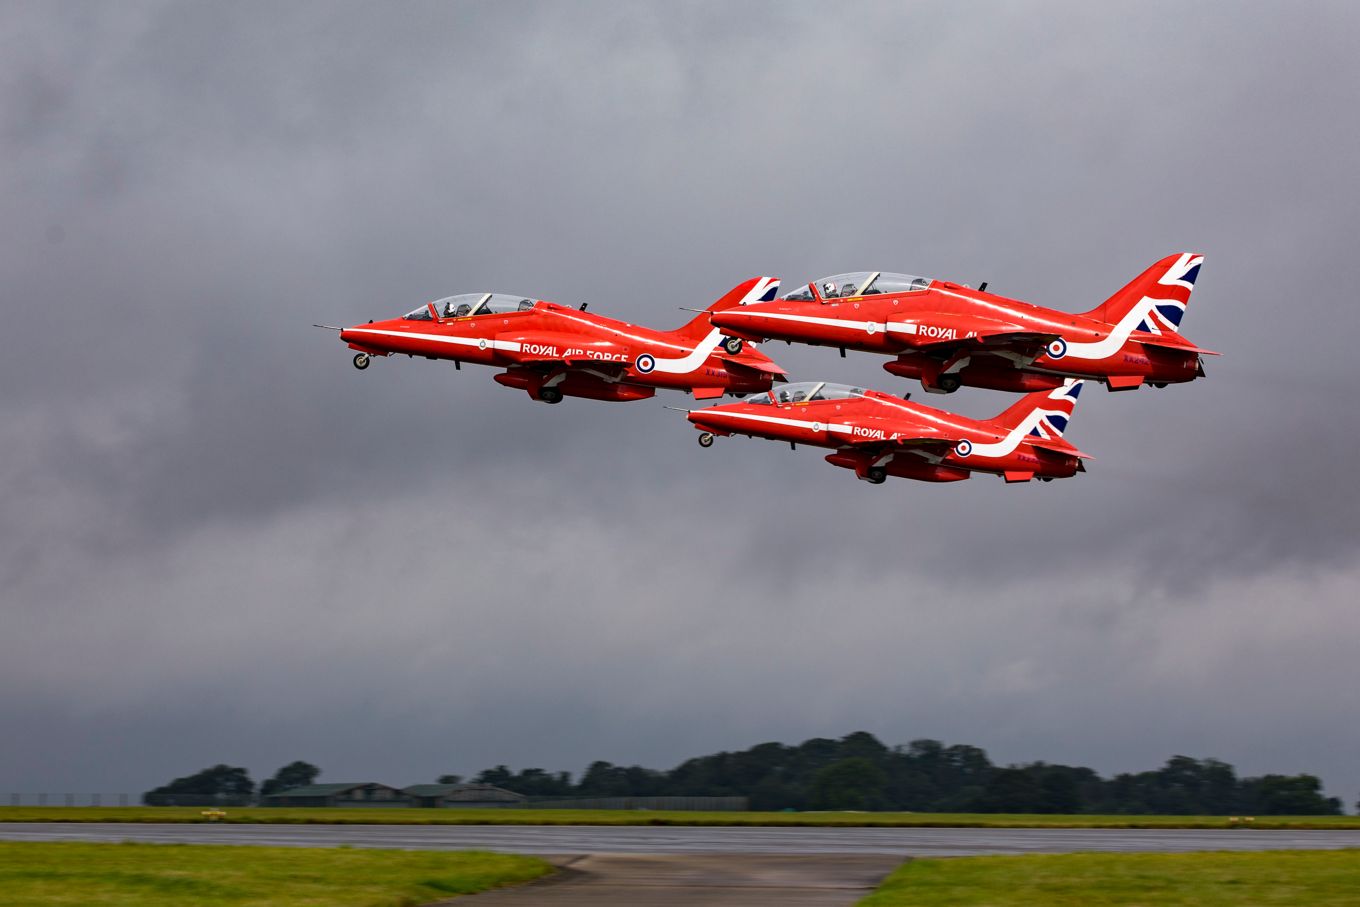 The Red Arrows departing RAF Scampton earlier today. Picture by Corporal Graham Taylor.